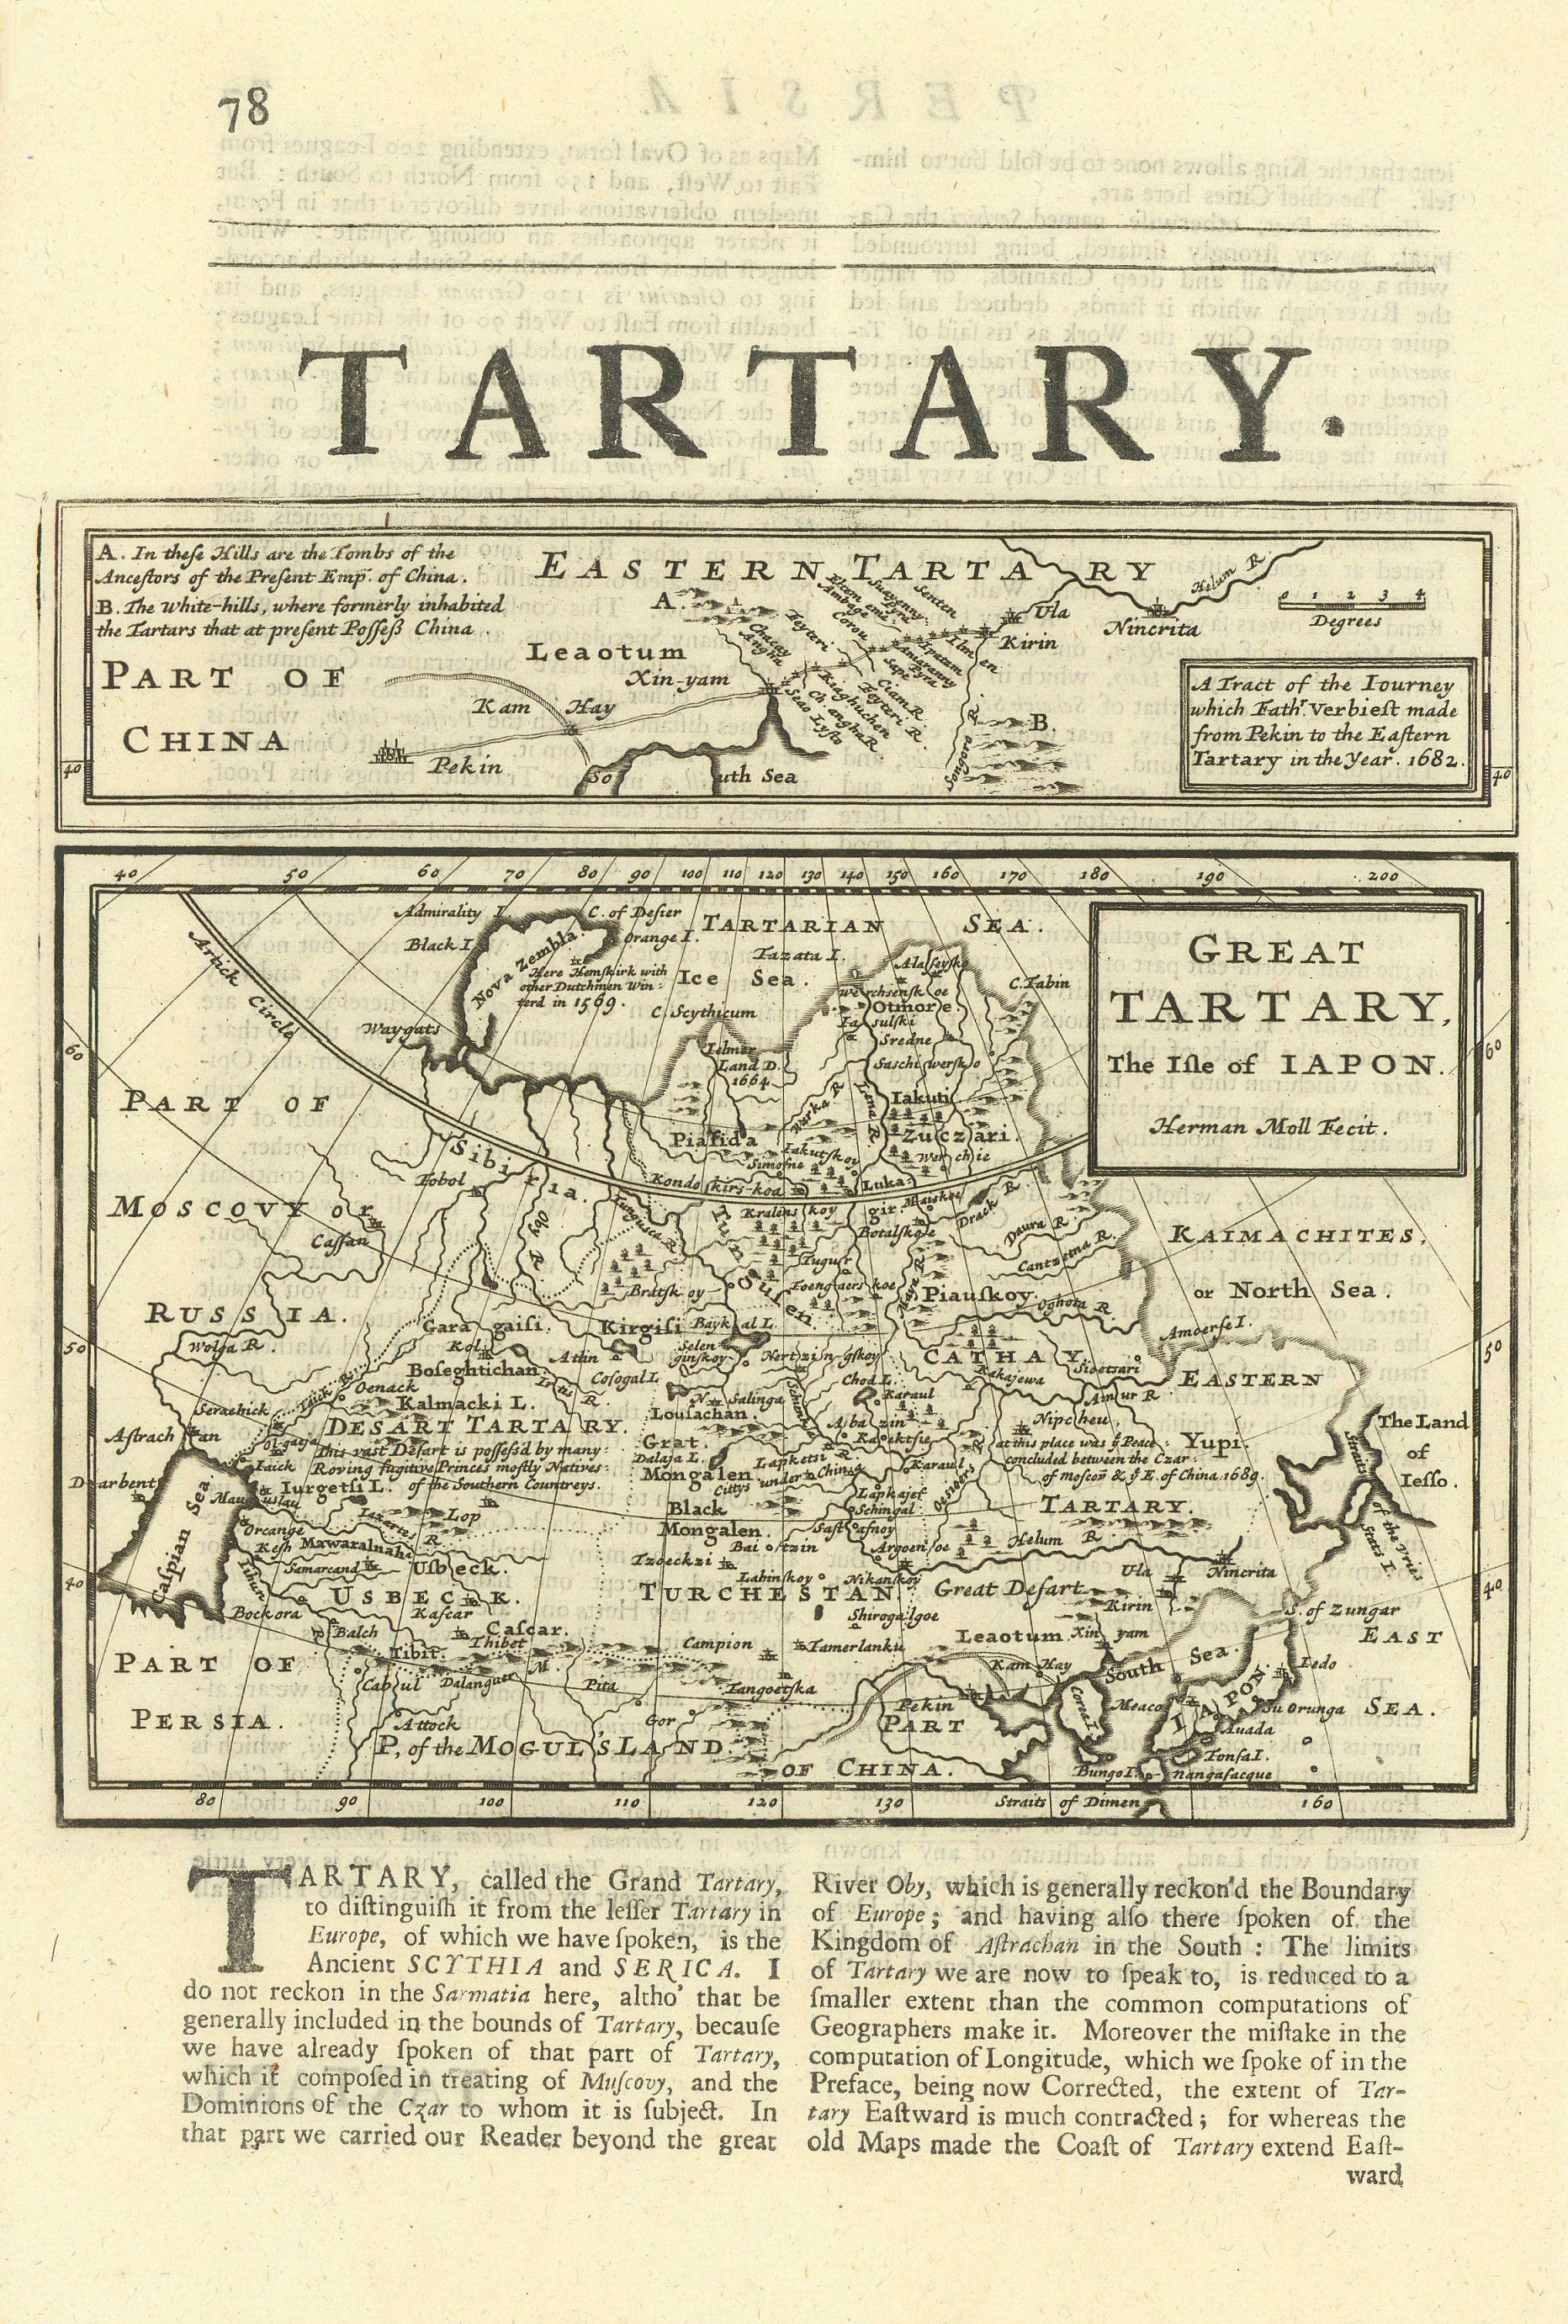 Great Tartary, the Isle of Iapon by Herman Moll. Central Asia & Japan 1709 map